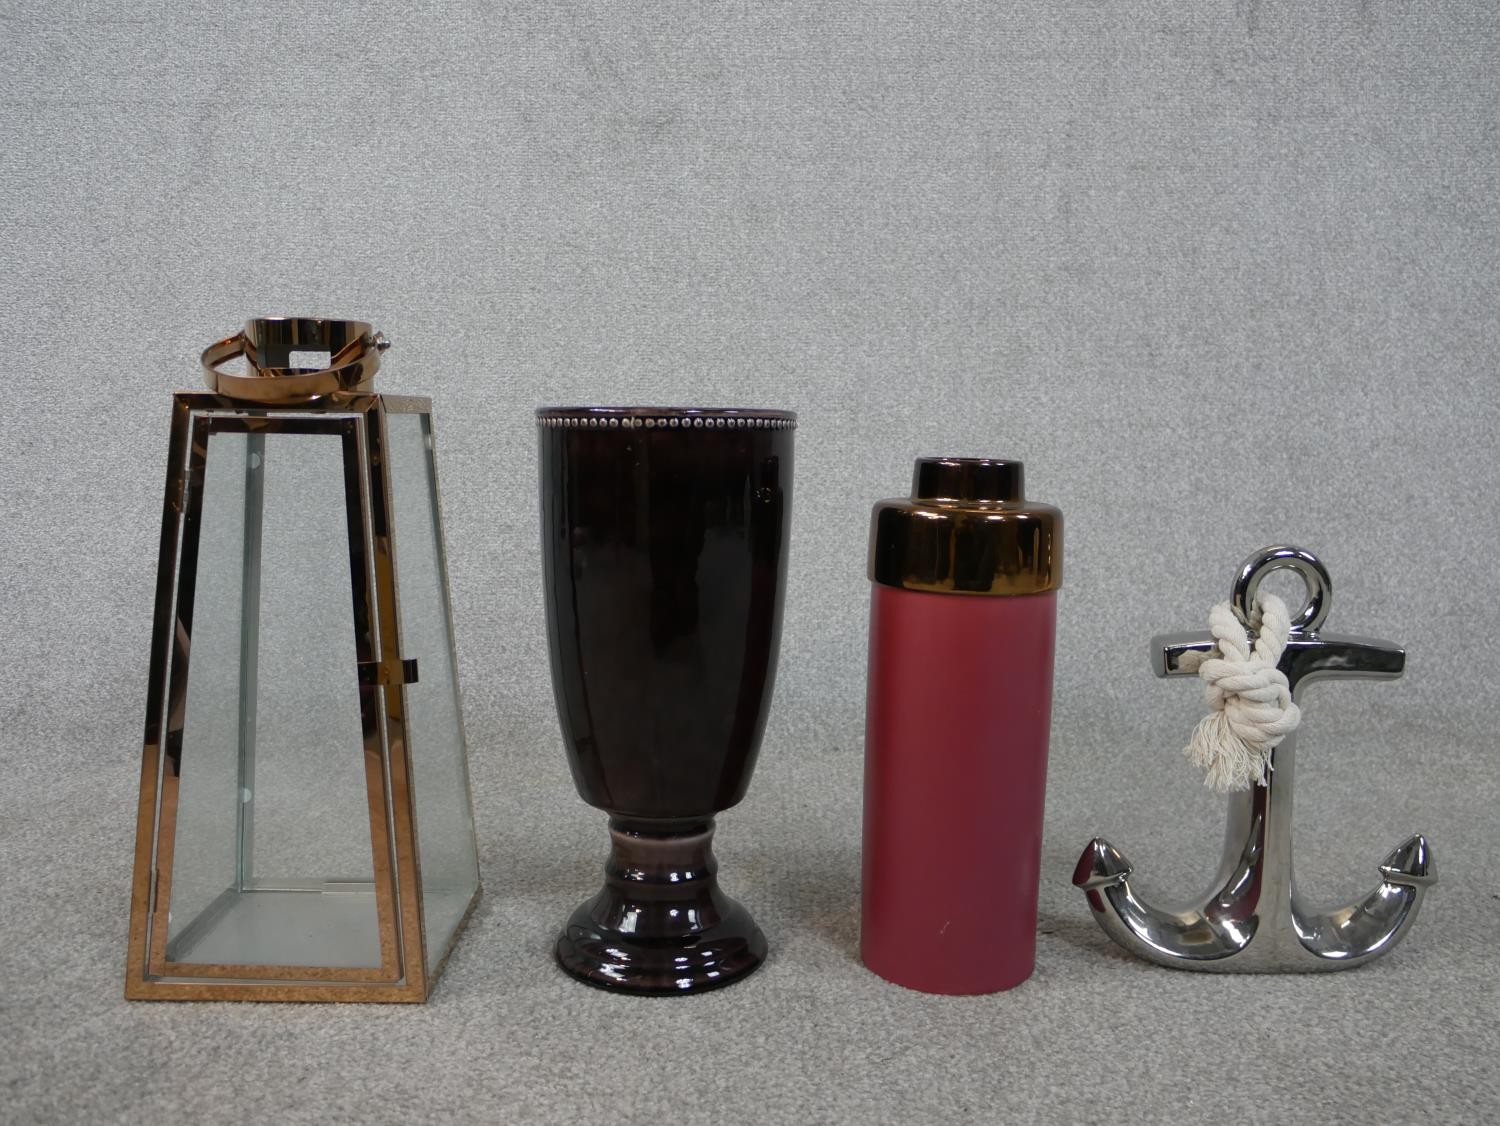 A Boconcept maroon and bronze glaze vase, a silver glaze anchor with rope, a copper and glass